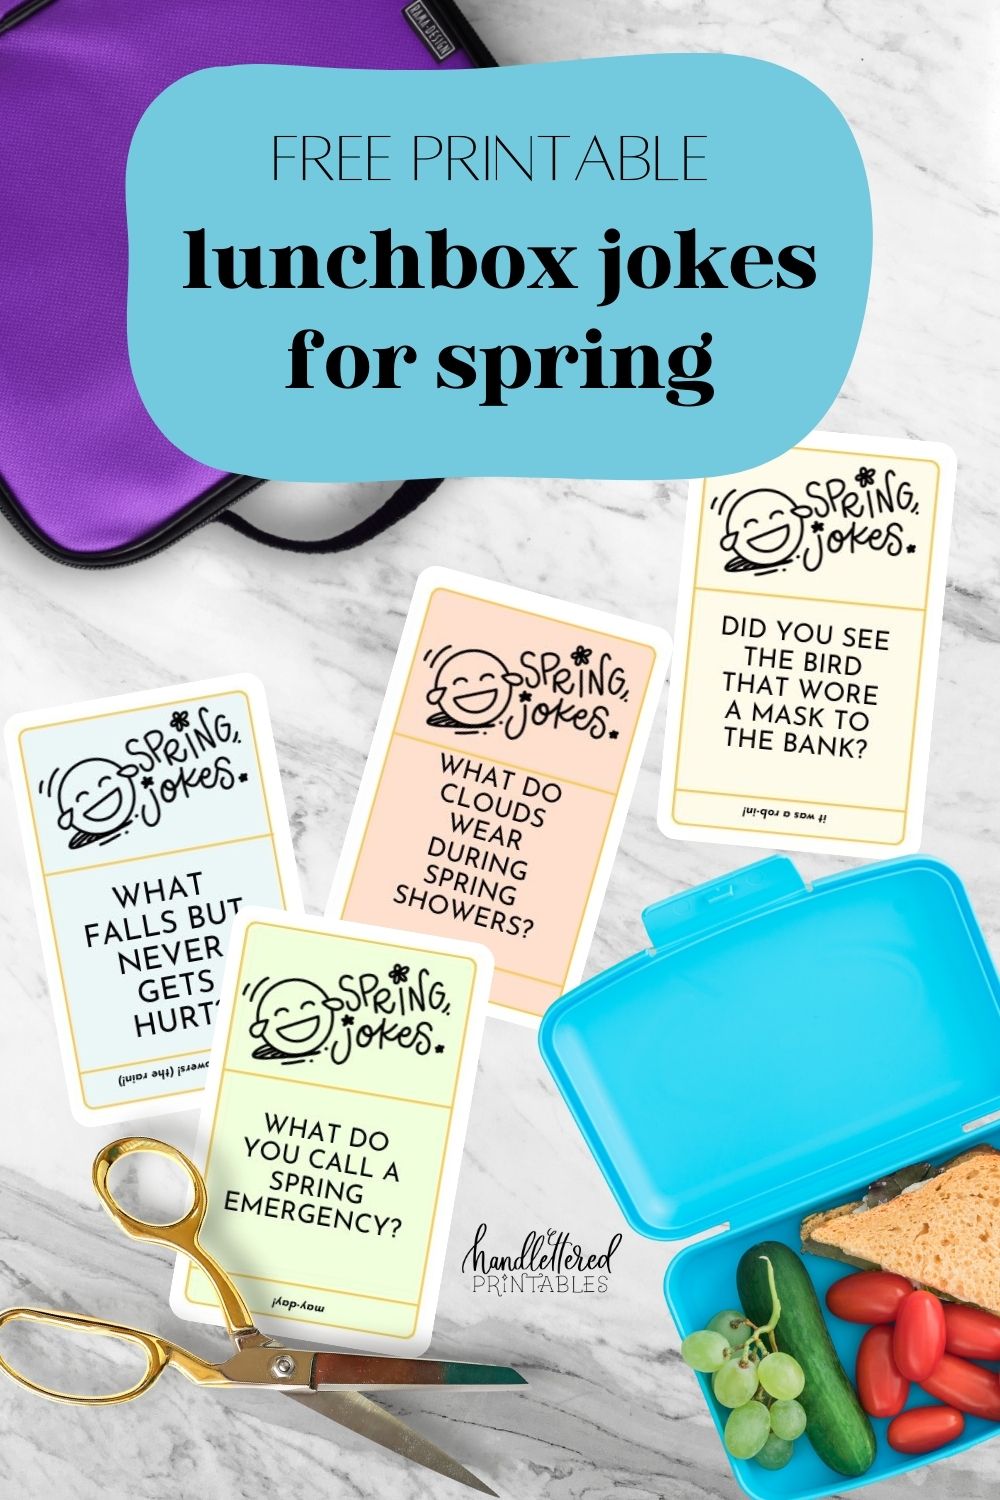 text over reads: free printable lunchbox jokes for spring image of lunchbox and lunch packing on marble countertop with joke cards cut to size. joke cards printed in color with hand lettered title, illustrated laughing face emoji and easy to read jokes for kids.